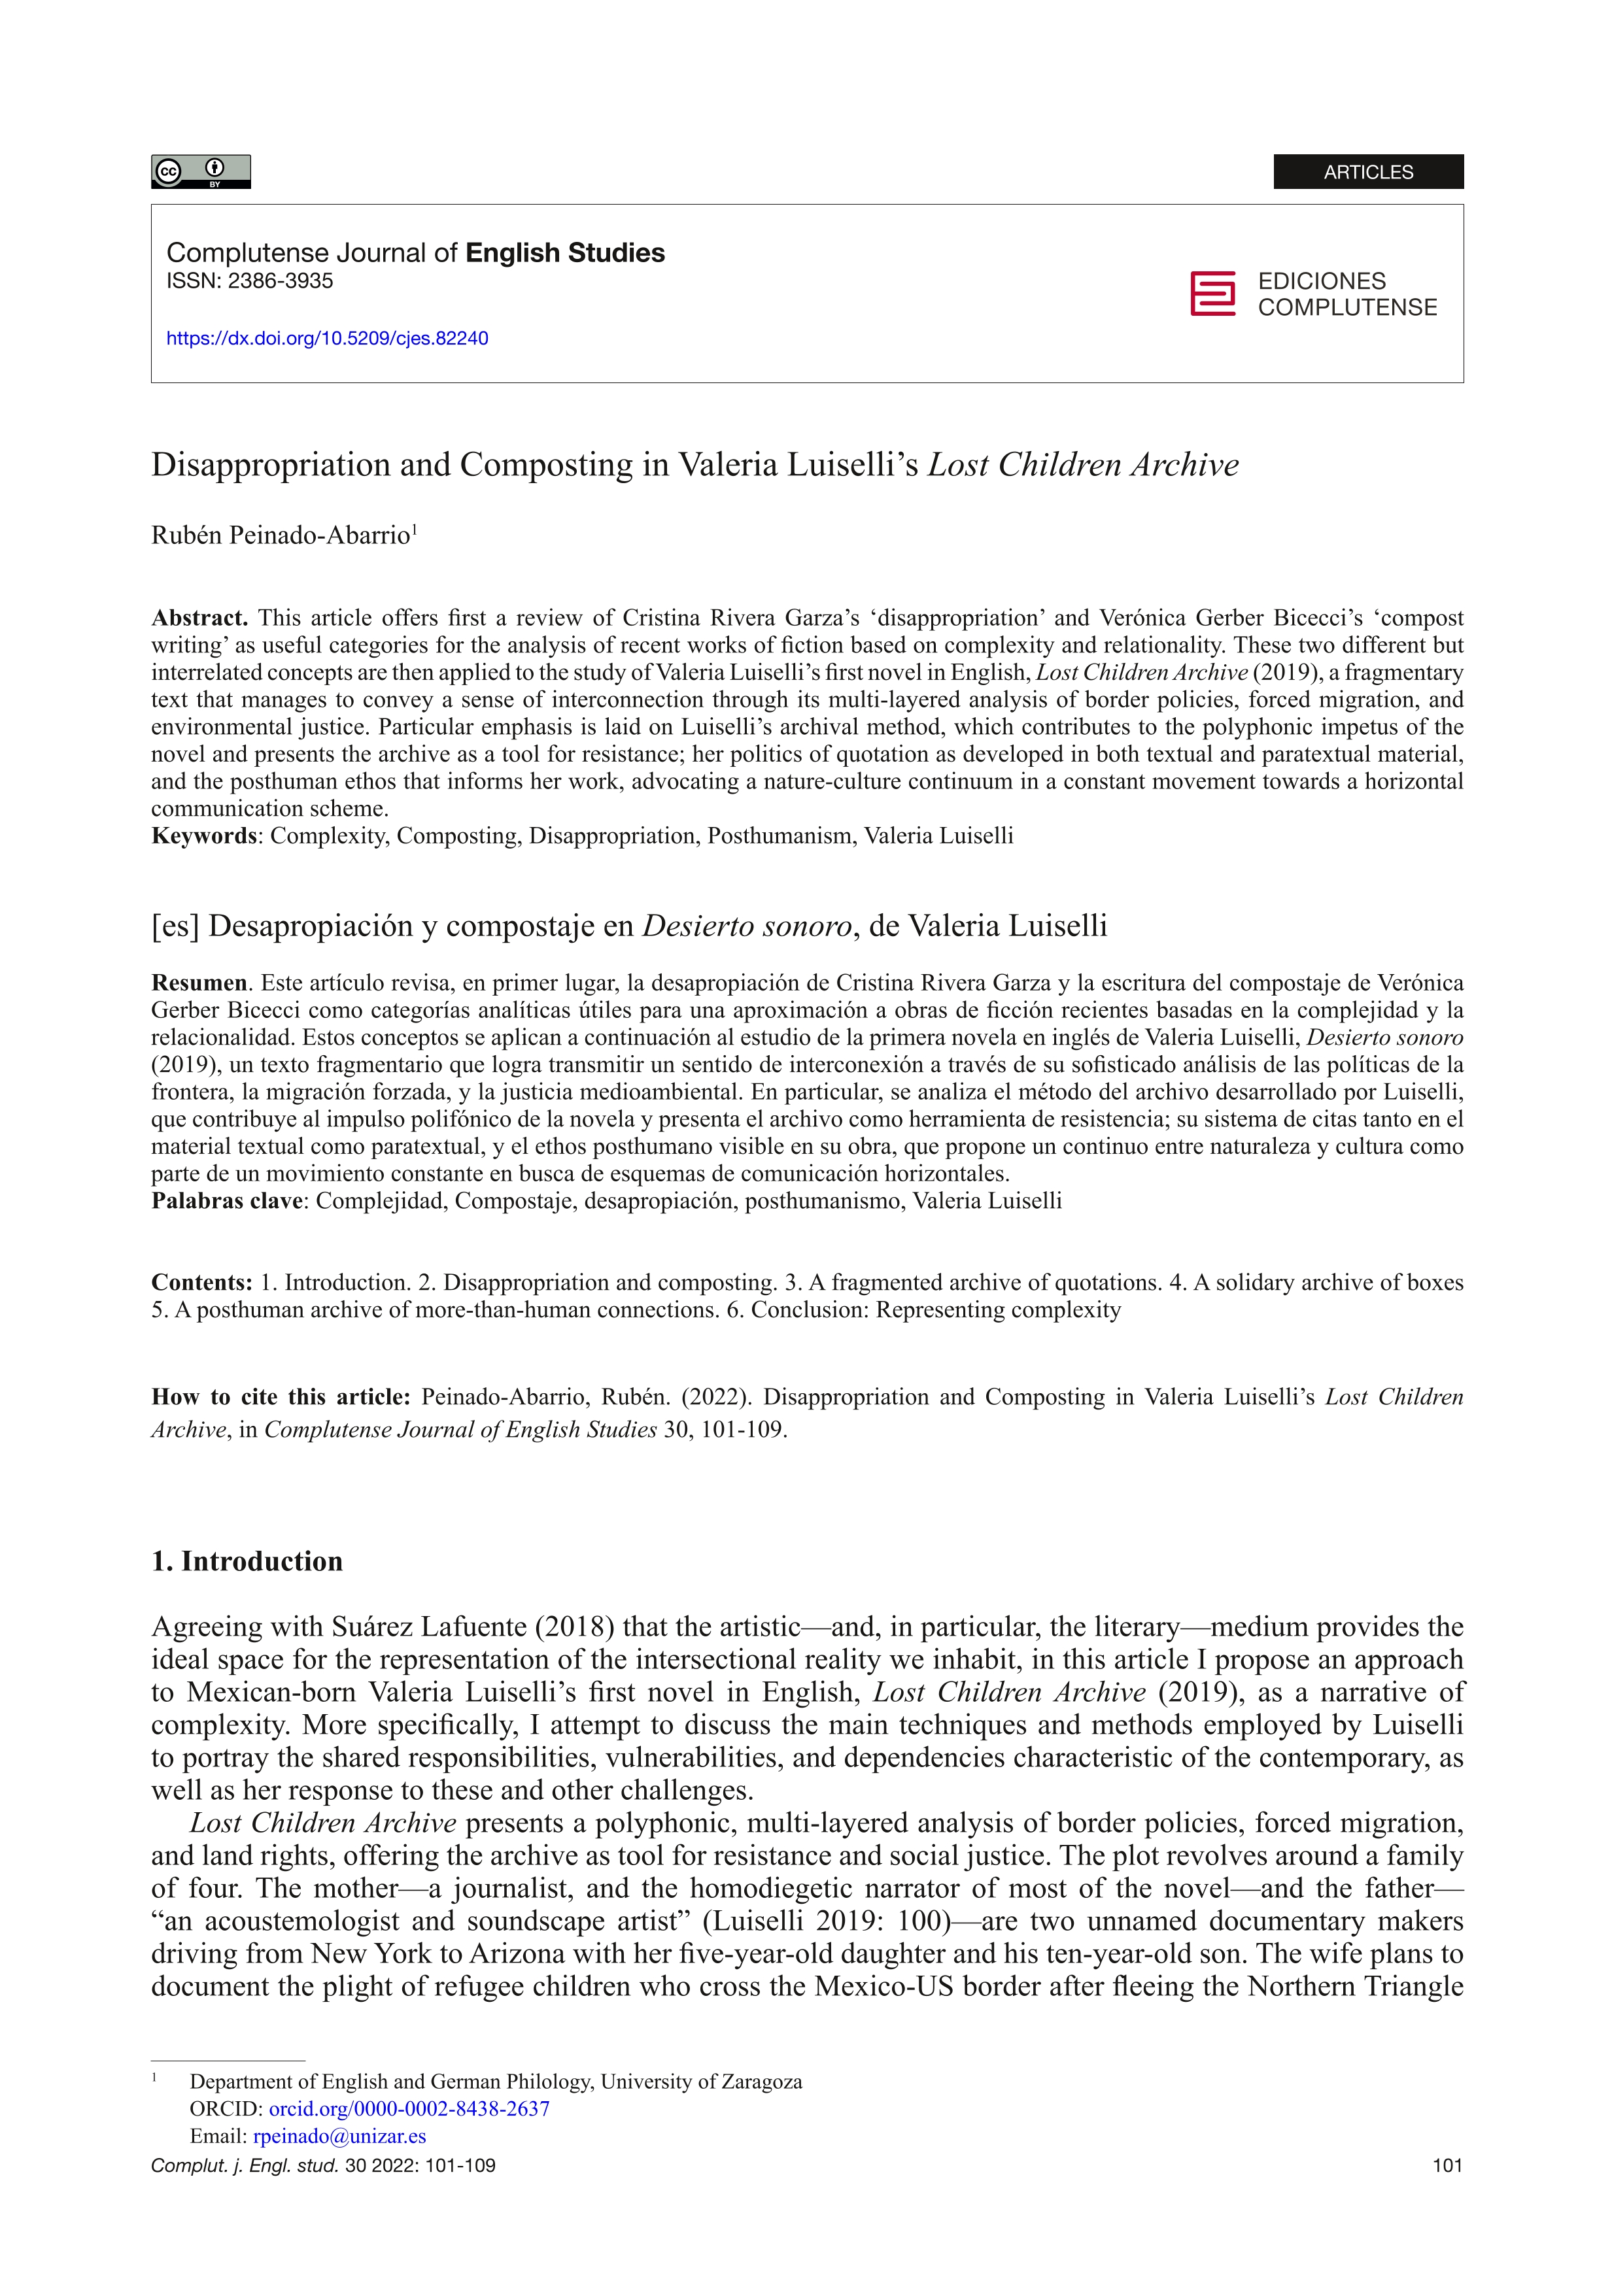 Disappropriation and Composting in Valeria Luiselli’s Lost Children Archive